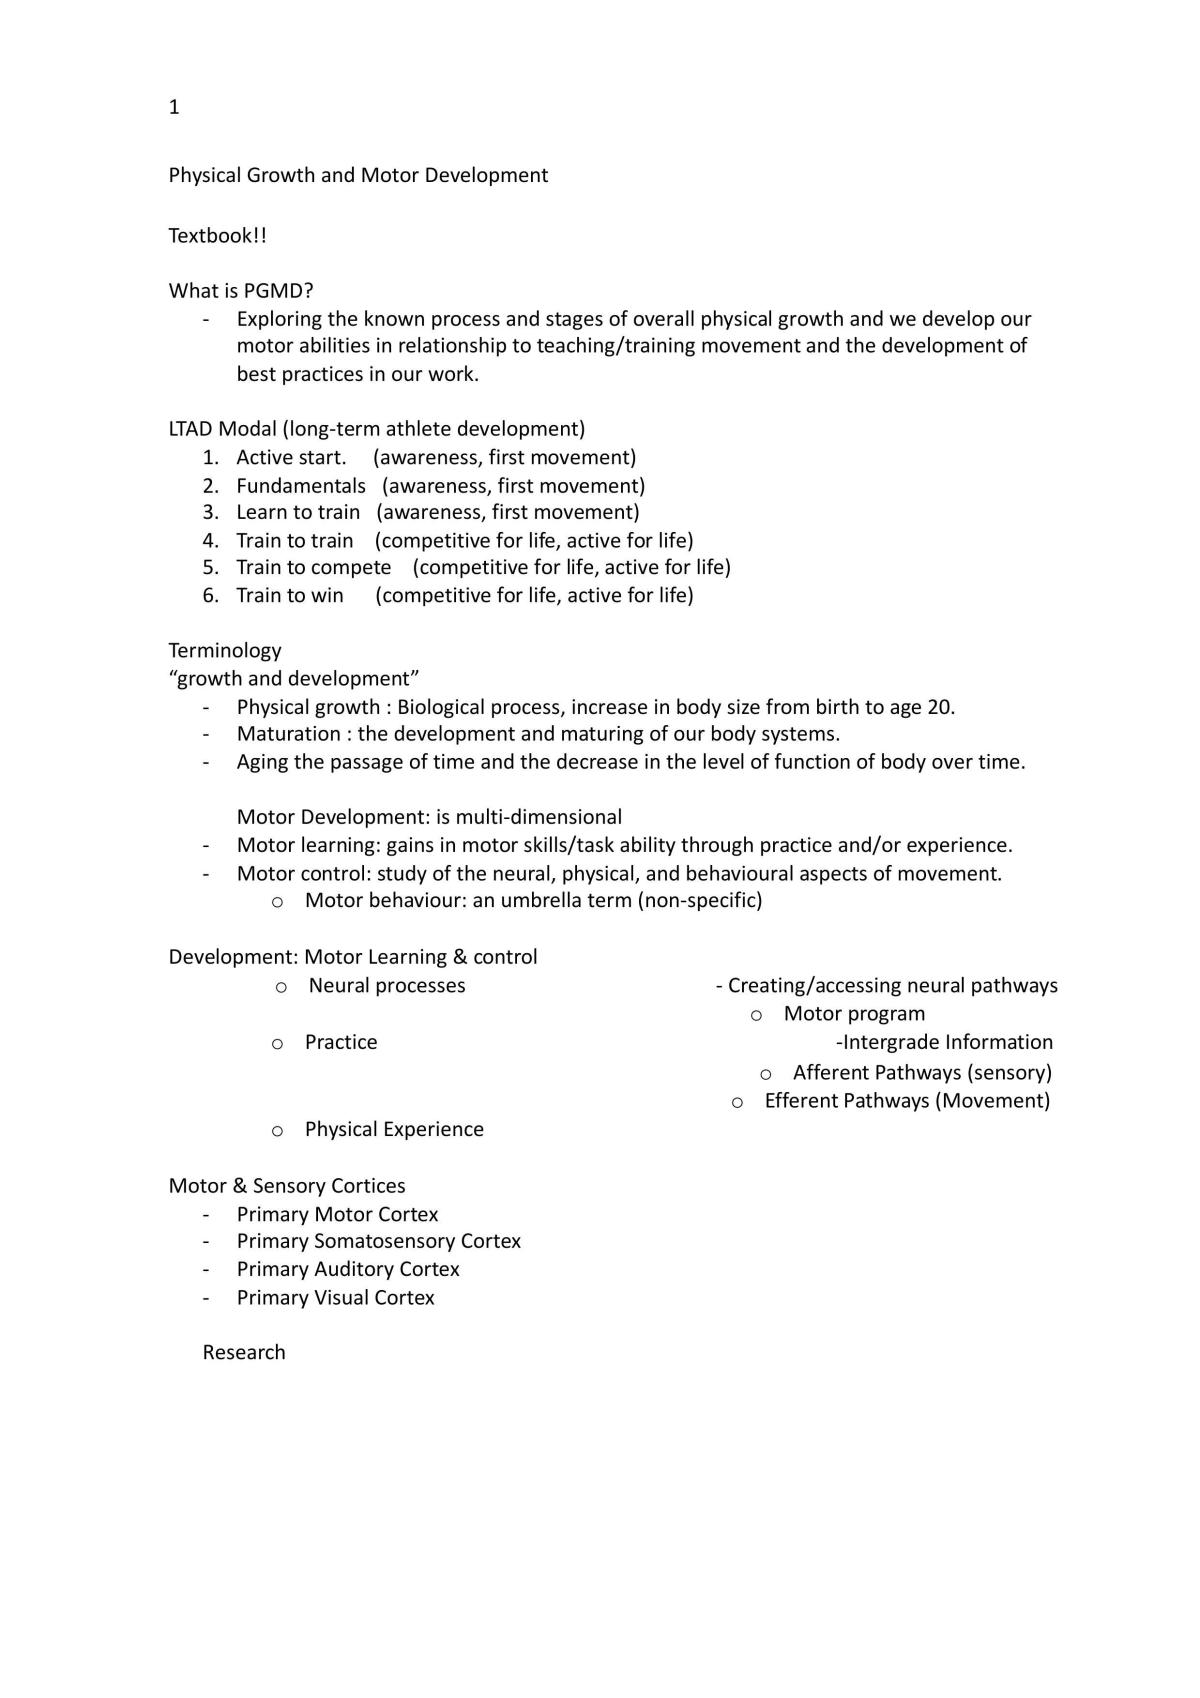 Physical Growth and Motor Development Study Notes - Page 1